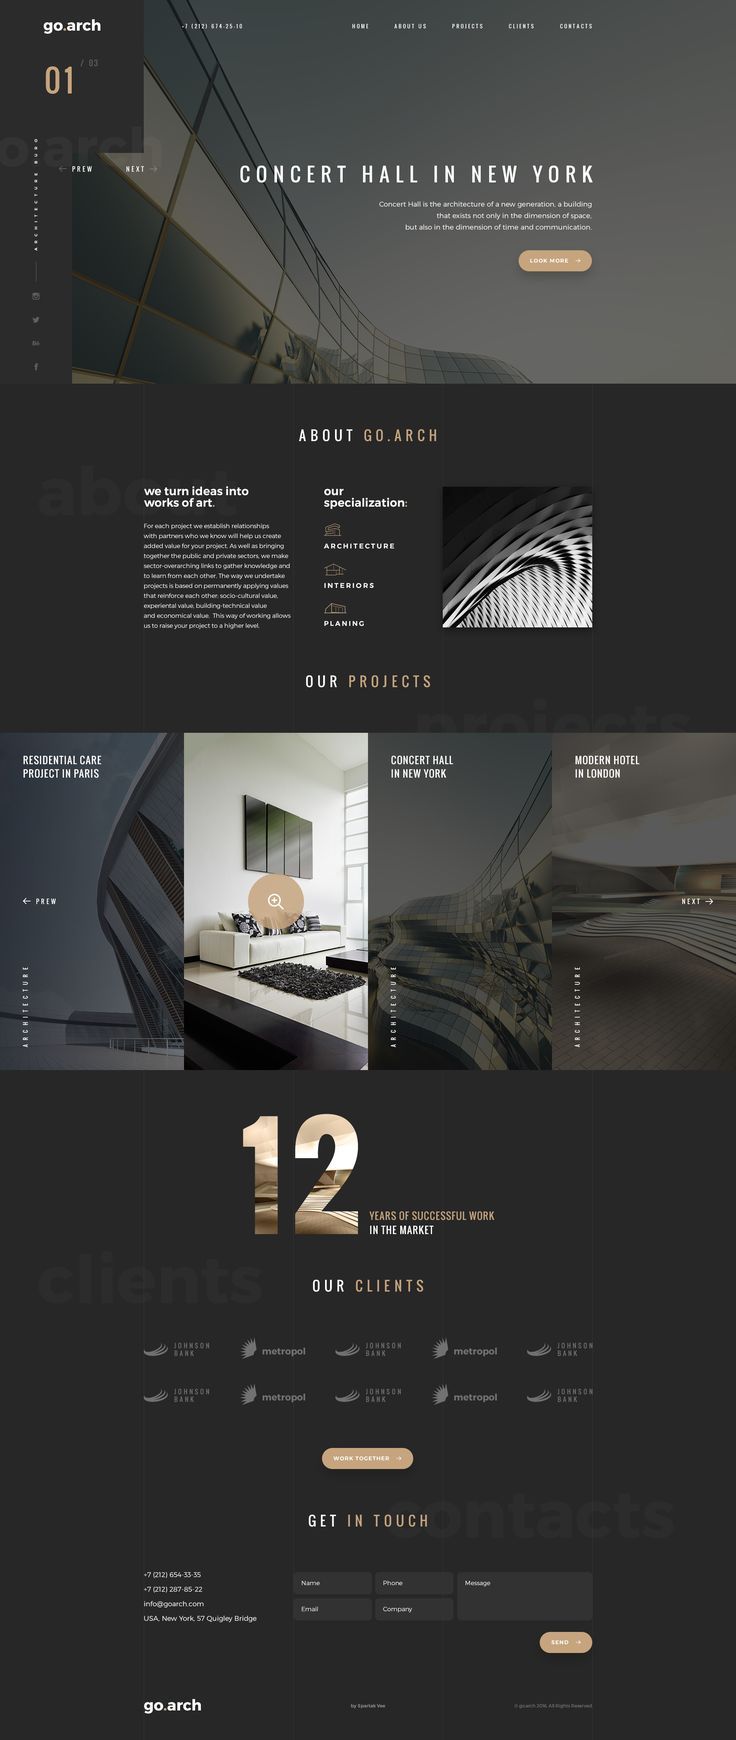 the website design is designed to look like it has been created in black and gold